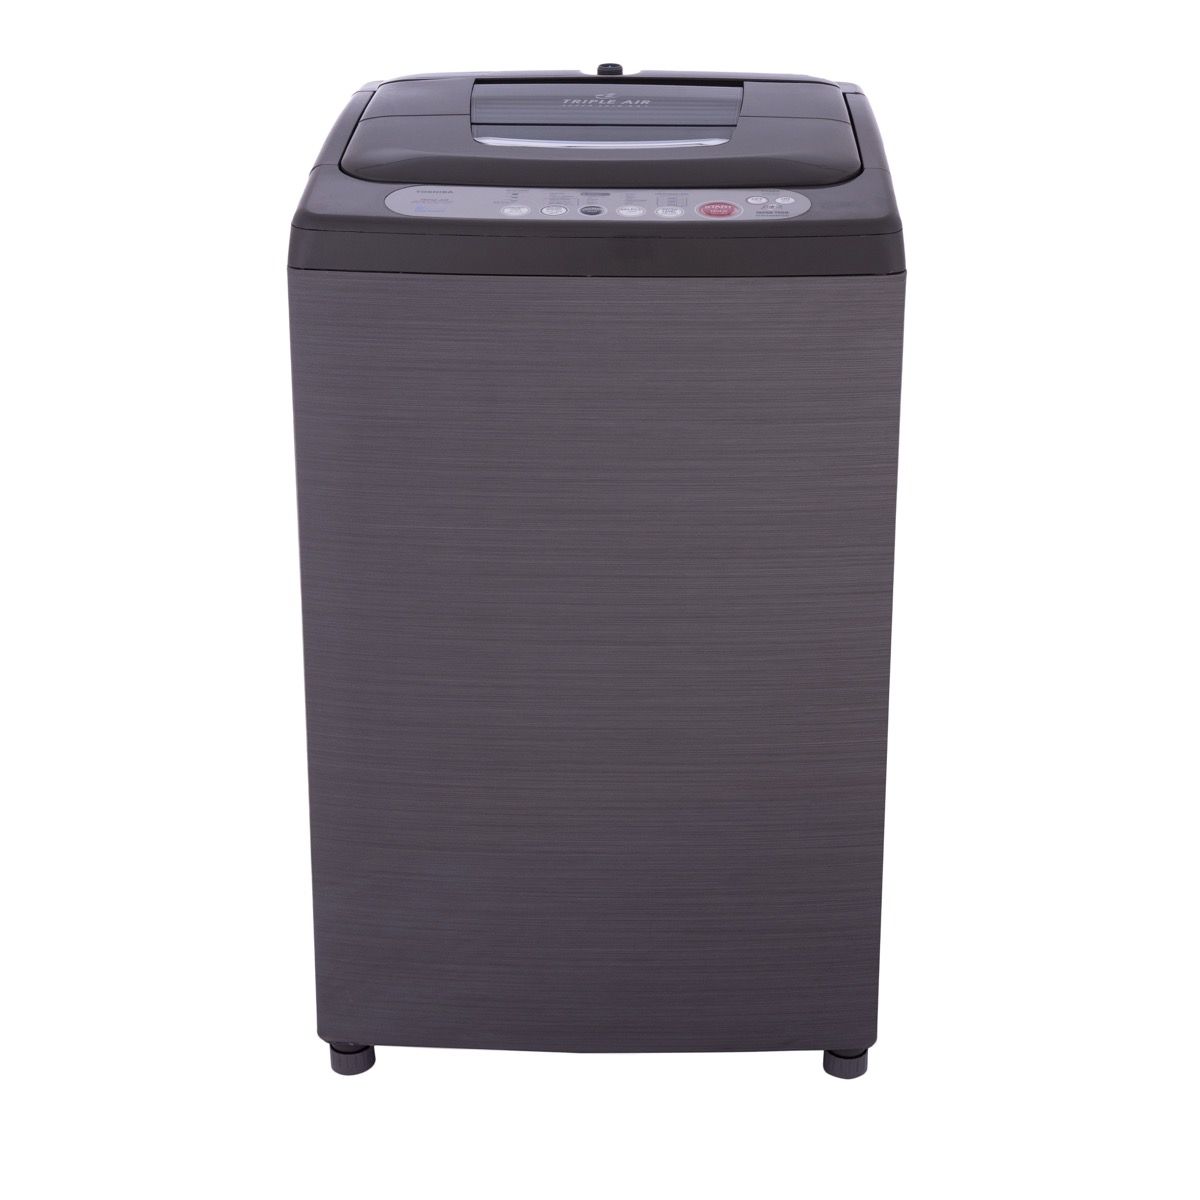 Toshiba Free Standing Top Load Automatic Washing Machine, 8 KG, Silver - AEW-8460SP DS